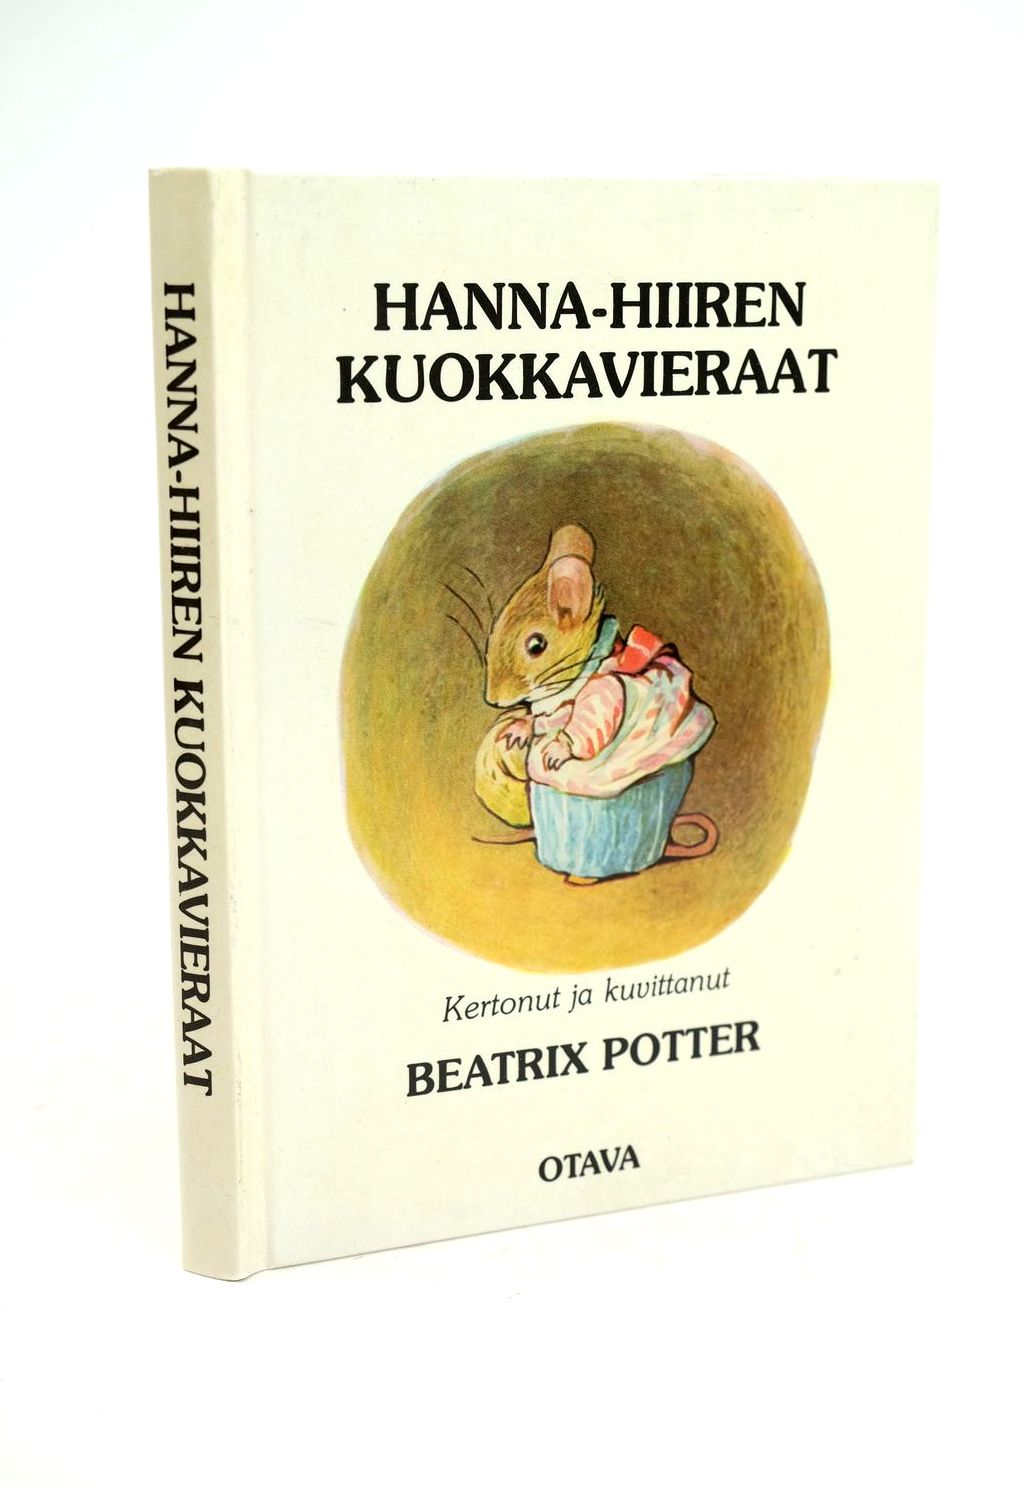 Photo of HANNA-HIIREN KUOKKAVIERAAT written by Potter, Beatrix illustrated by Potter, Beatrix published by Otava (STOCK CODE: 1318599)  for sale by Stella & Rose's Books